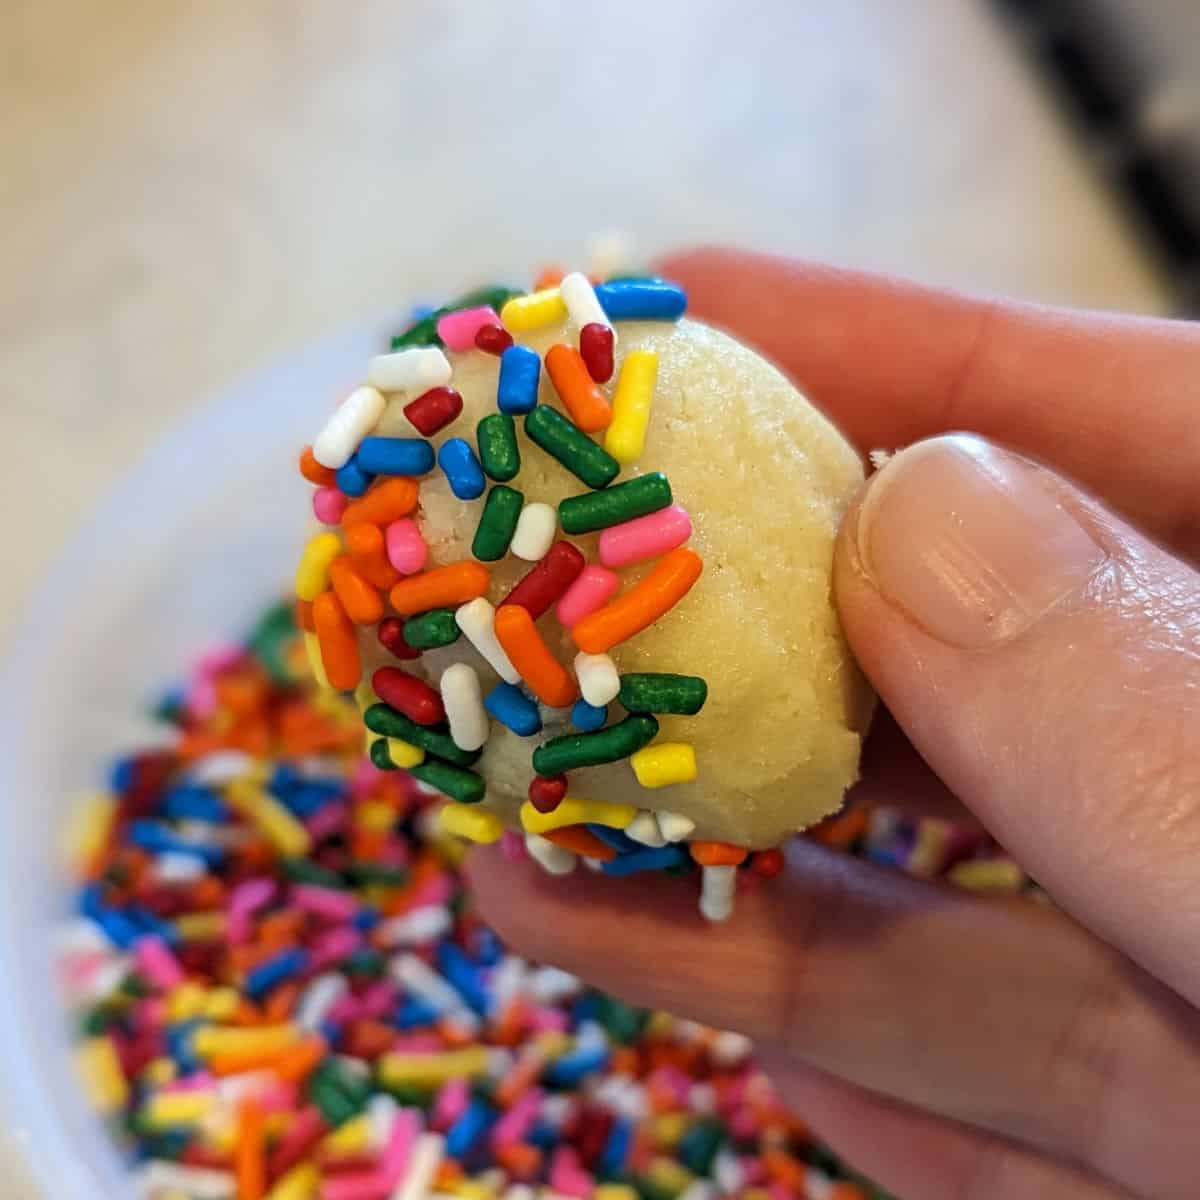 ball of cookie dough partially coated in sprinkles